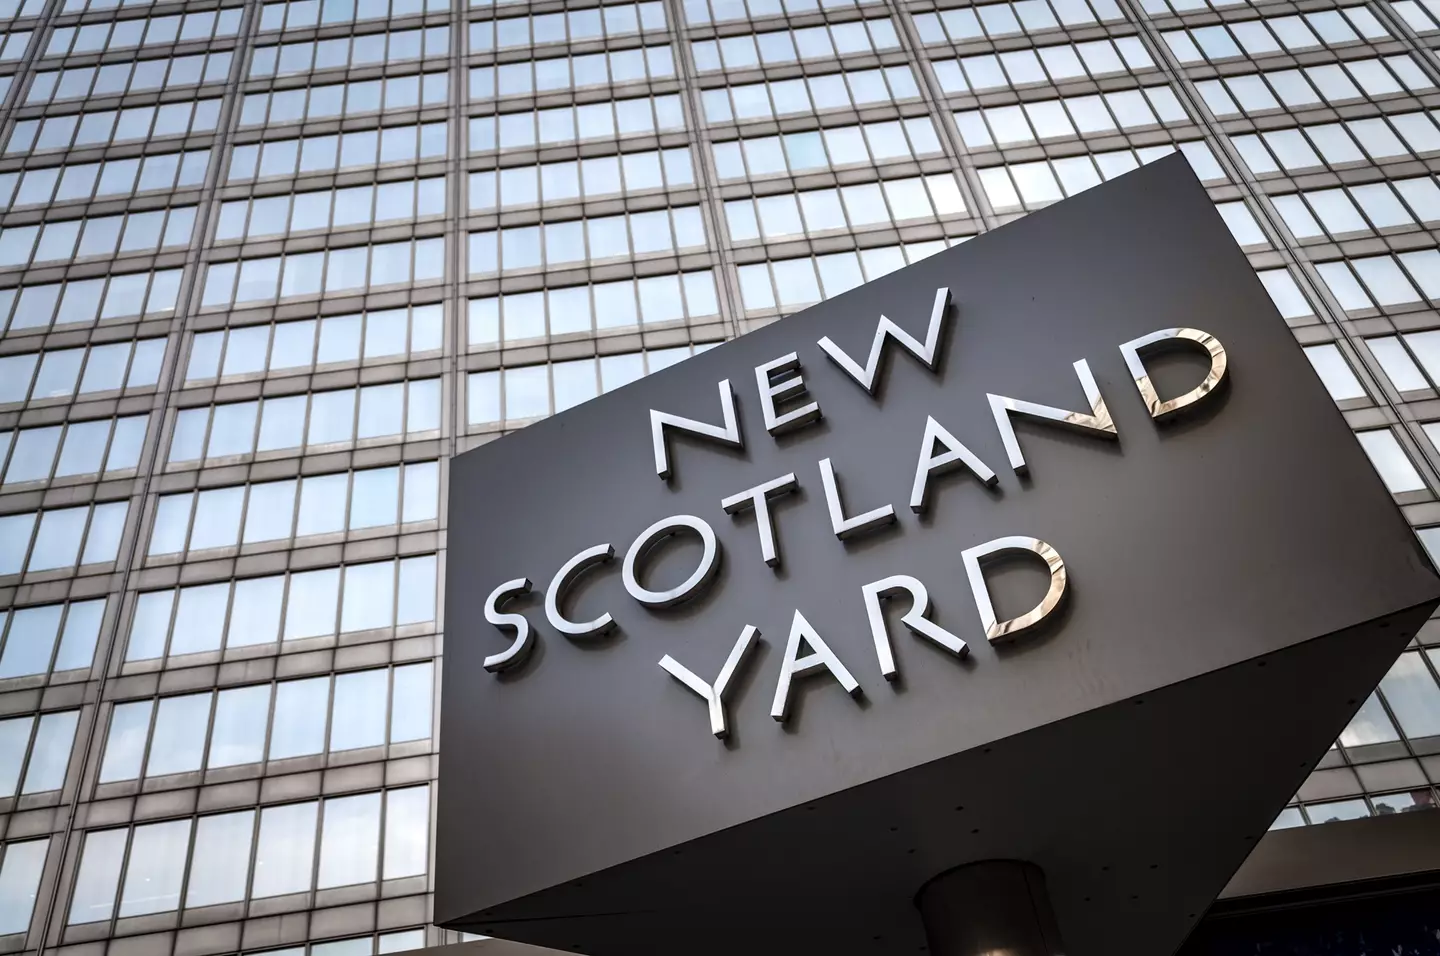 Scotland Yard has confirmed the officer has been suspended (